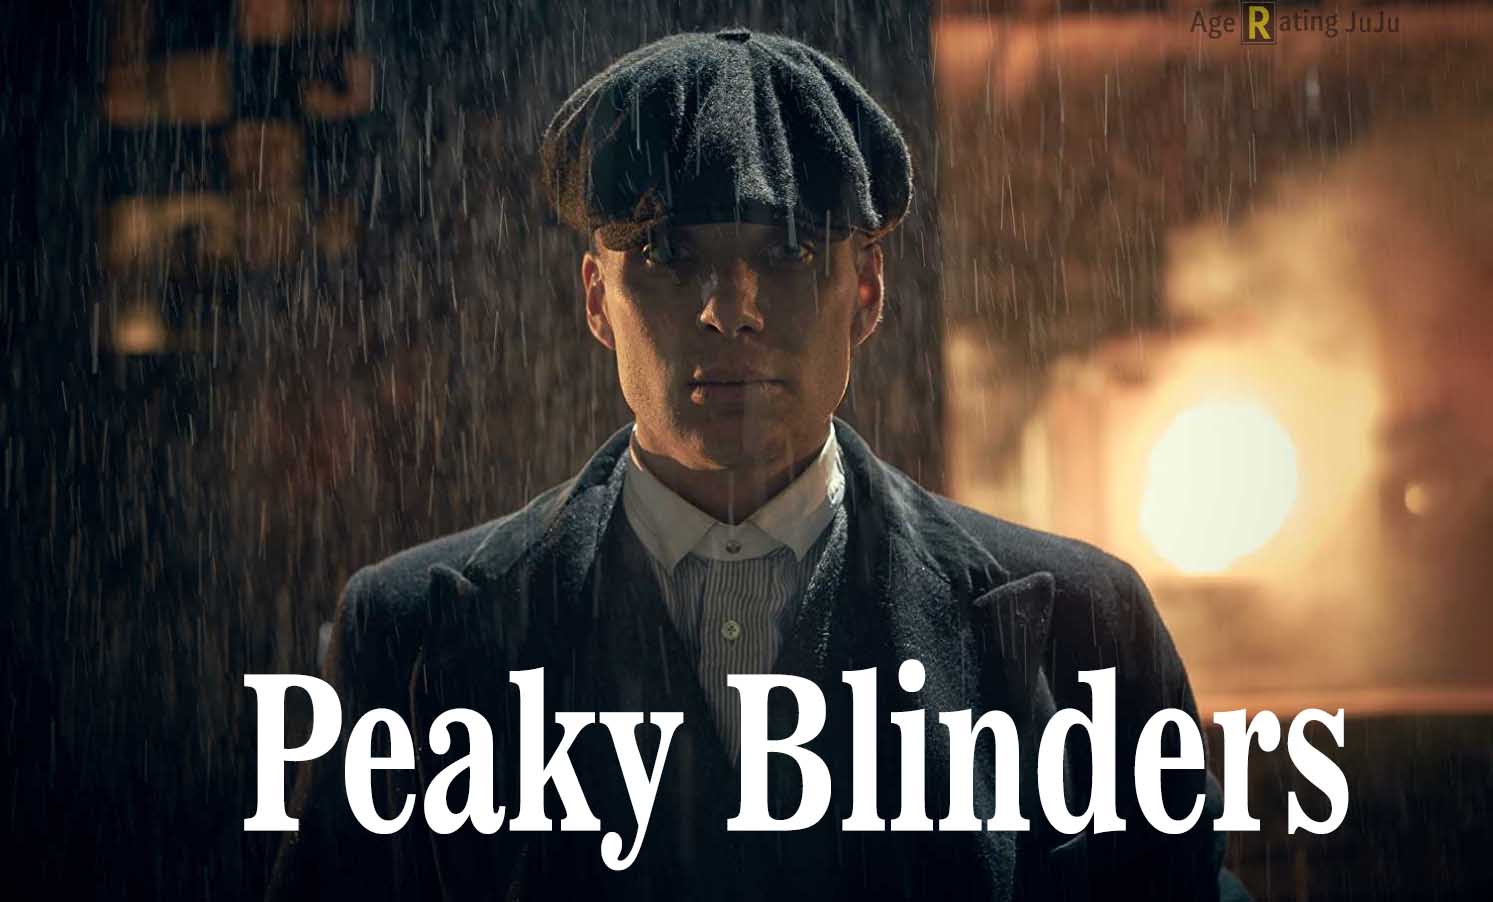 Peaky Blinders Age Rating 2018 - TV Show Netflix Poster Images and Wallpapers